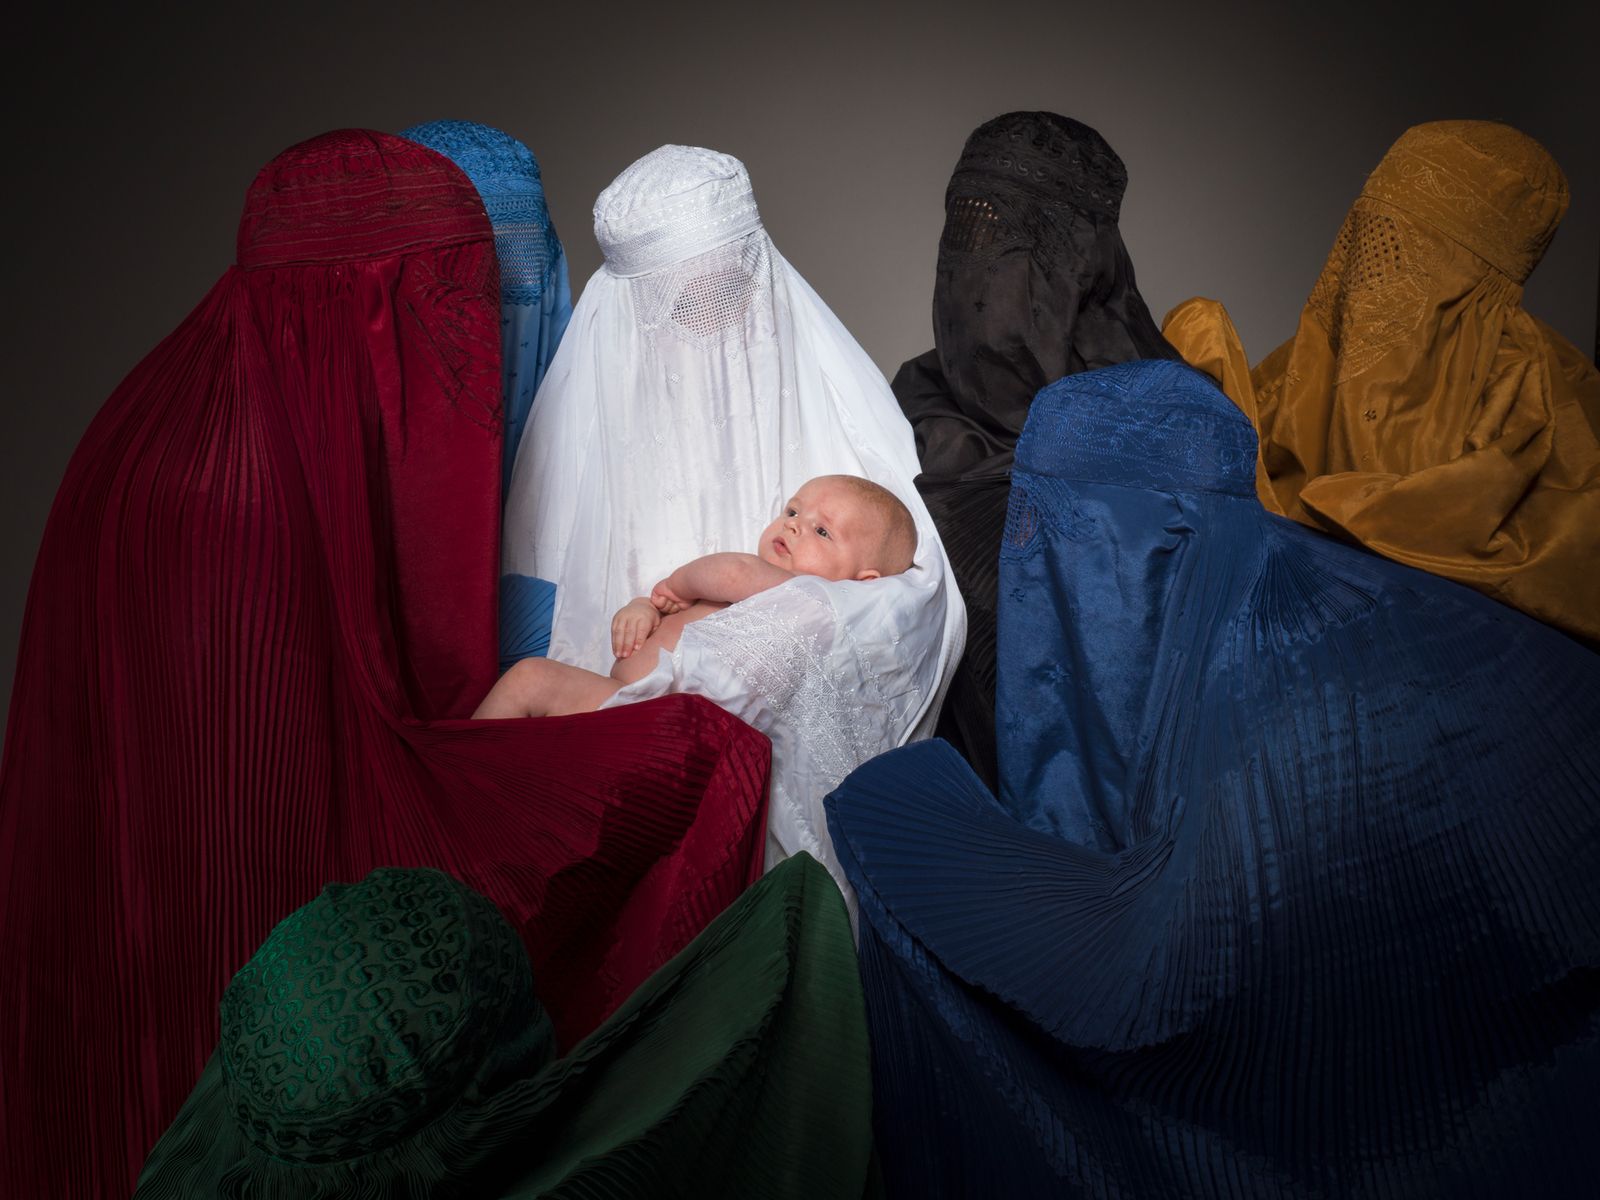 © A. Tamboly - Image from the Ladies of Kabul photography project